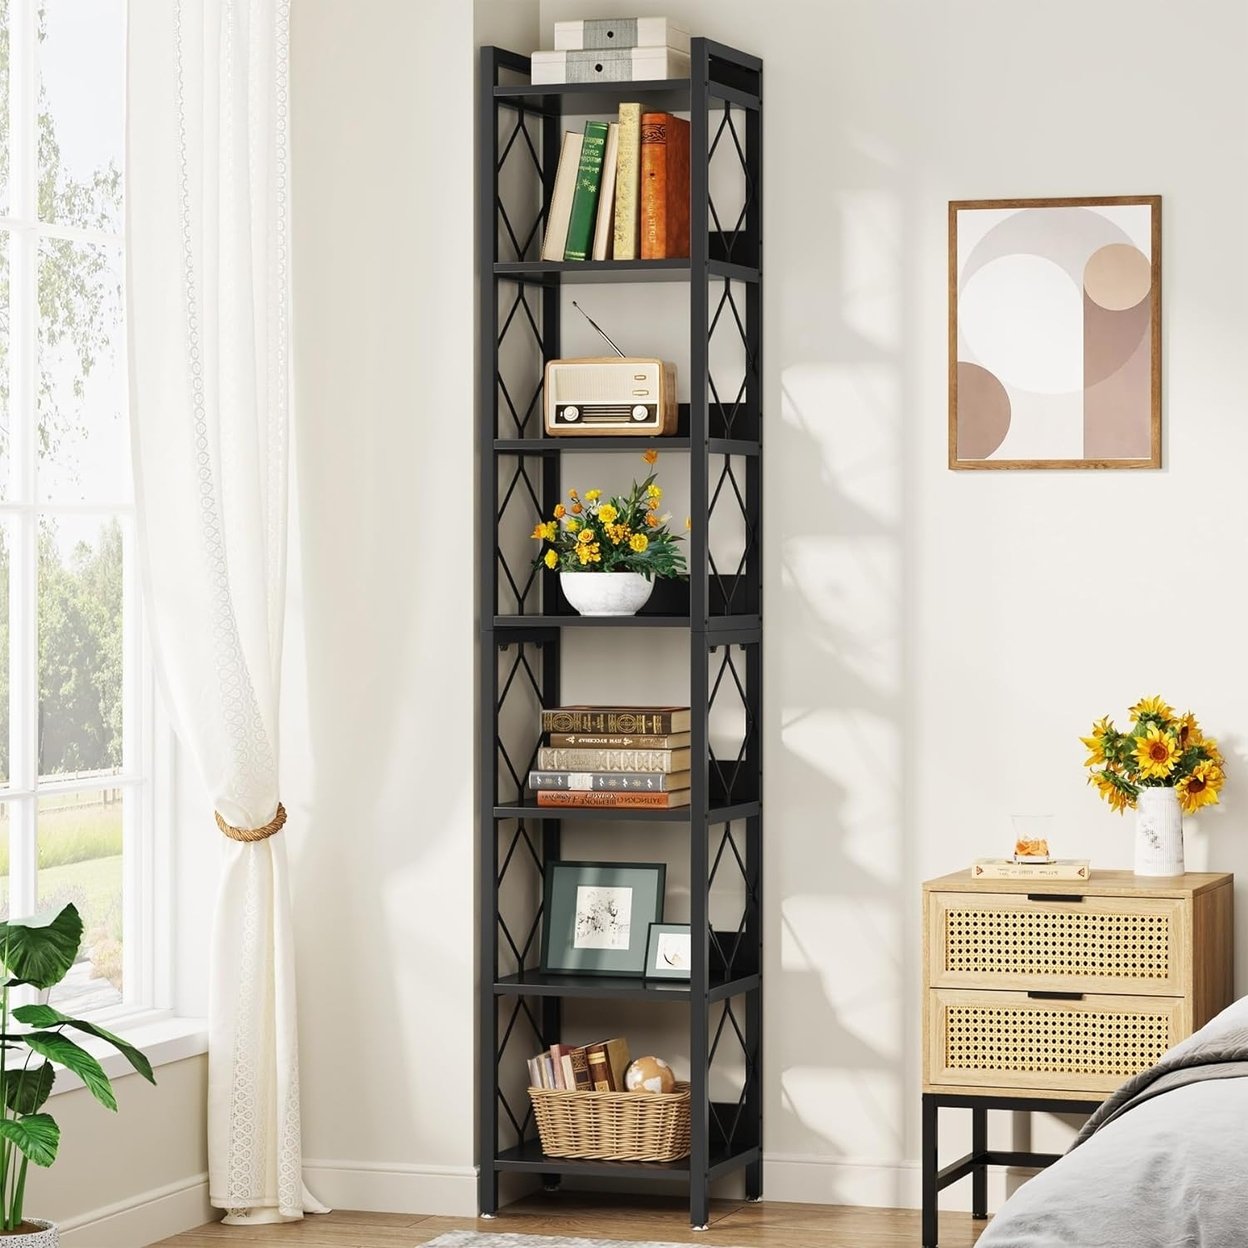 Tribesigns 78.7 Extra Tall Narrow Bookshelf, 7 Tier Skinny Bookcase For Small Spaces, Freestanding Display Shelves - Rustic Brown, 2pcs